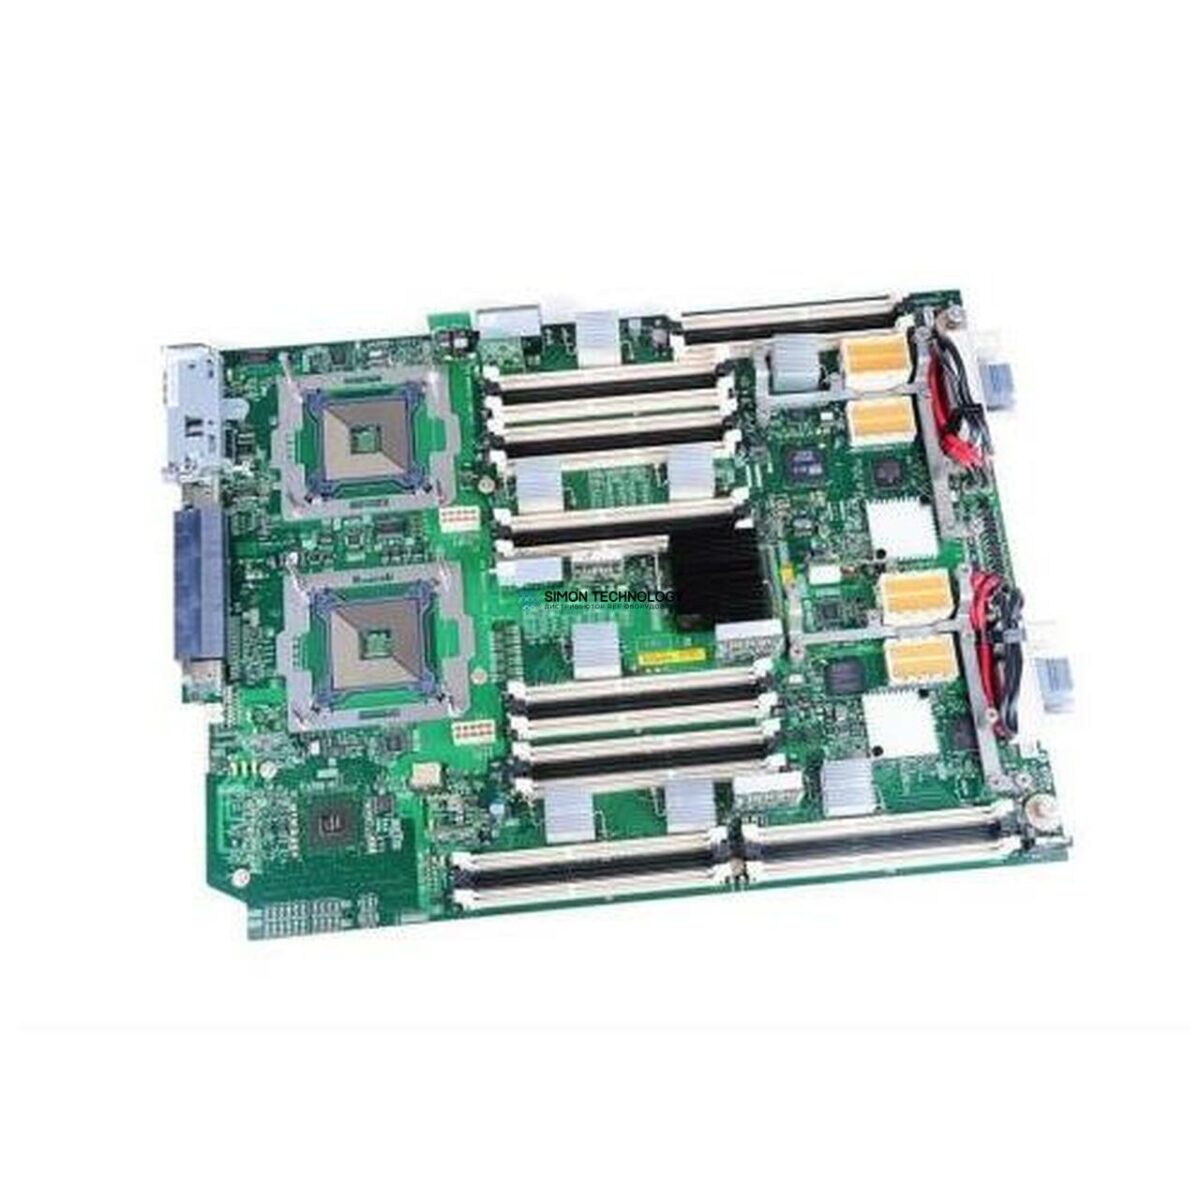 HPE SPS-BL860c System Board (AD217-69211)